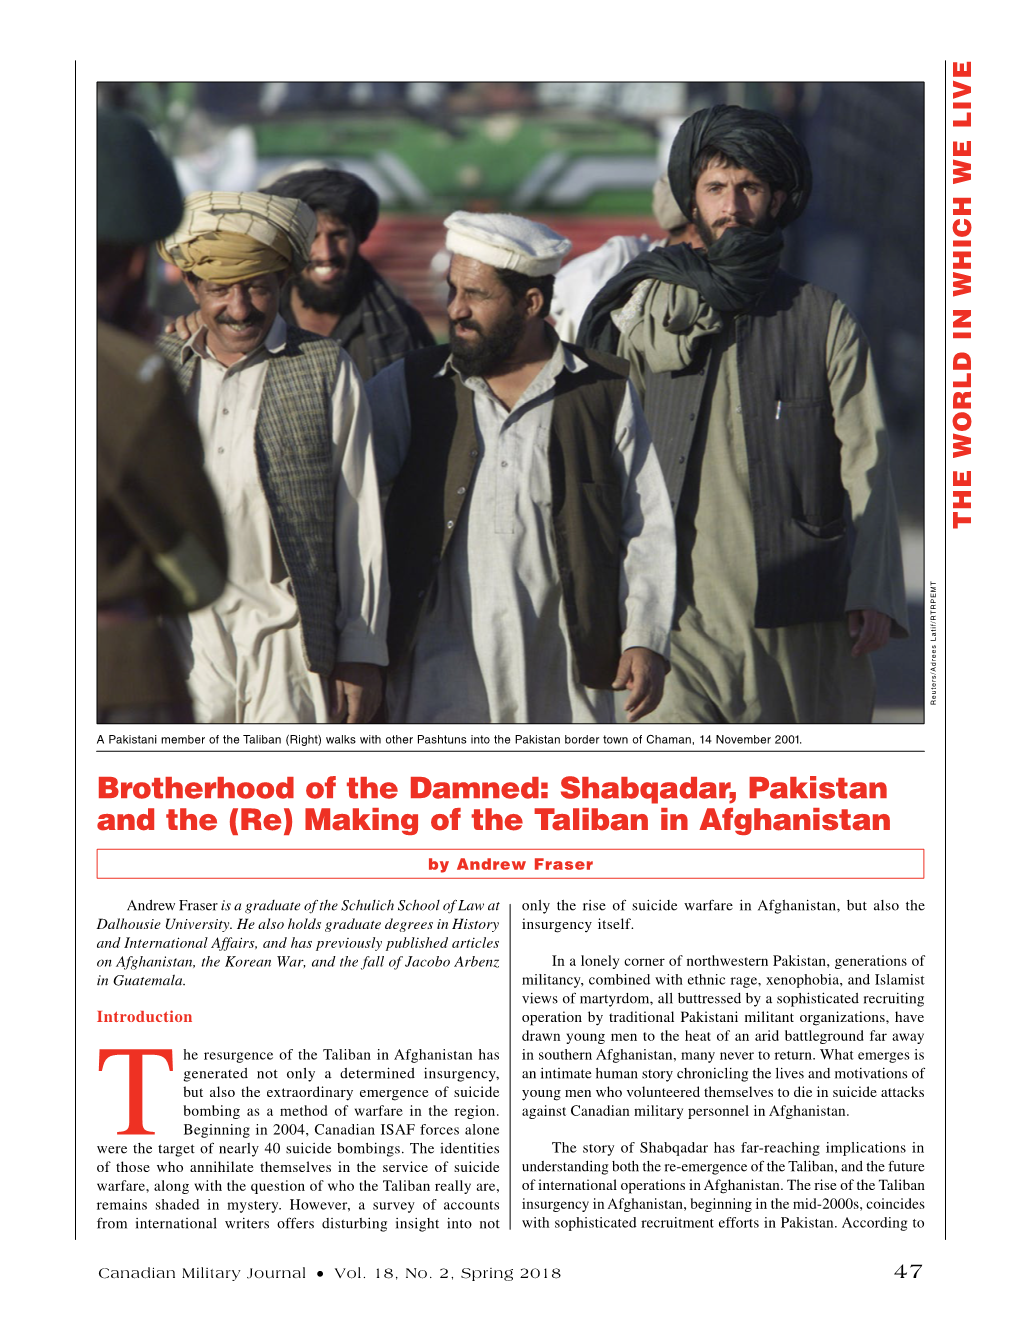 Making of the Taliban in Afghanistan